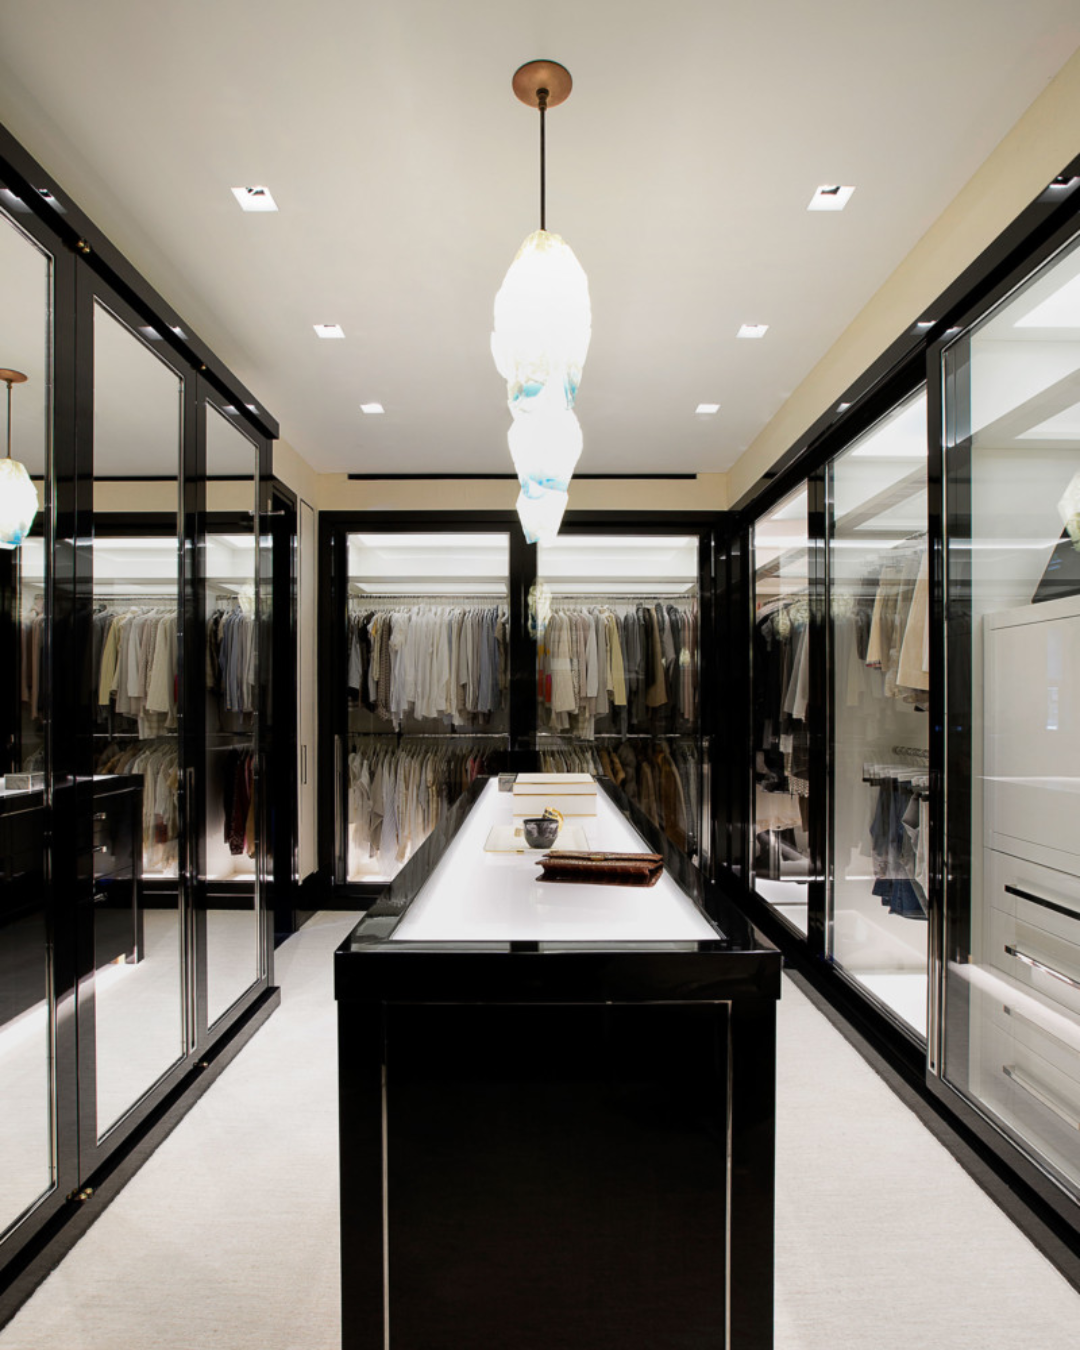 Walk-in Wardrobes- A Complete Guide